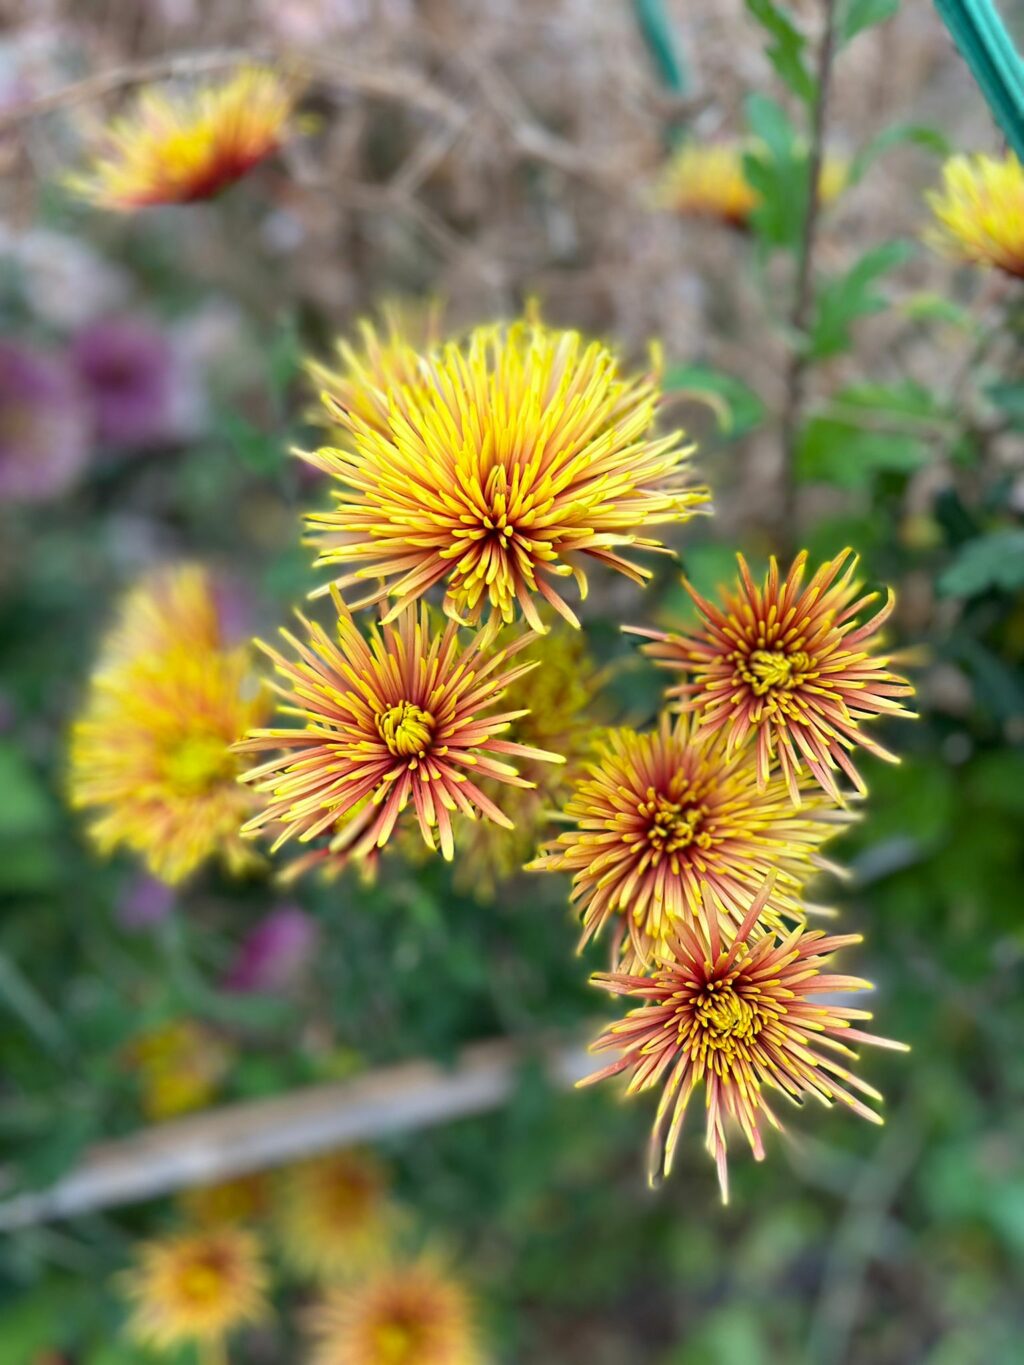 Yellow and bronze chrysanthemums with long petals are in bloom at Pauntley Petals in Gloucestershire.